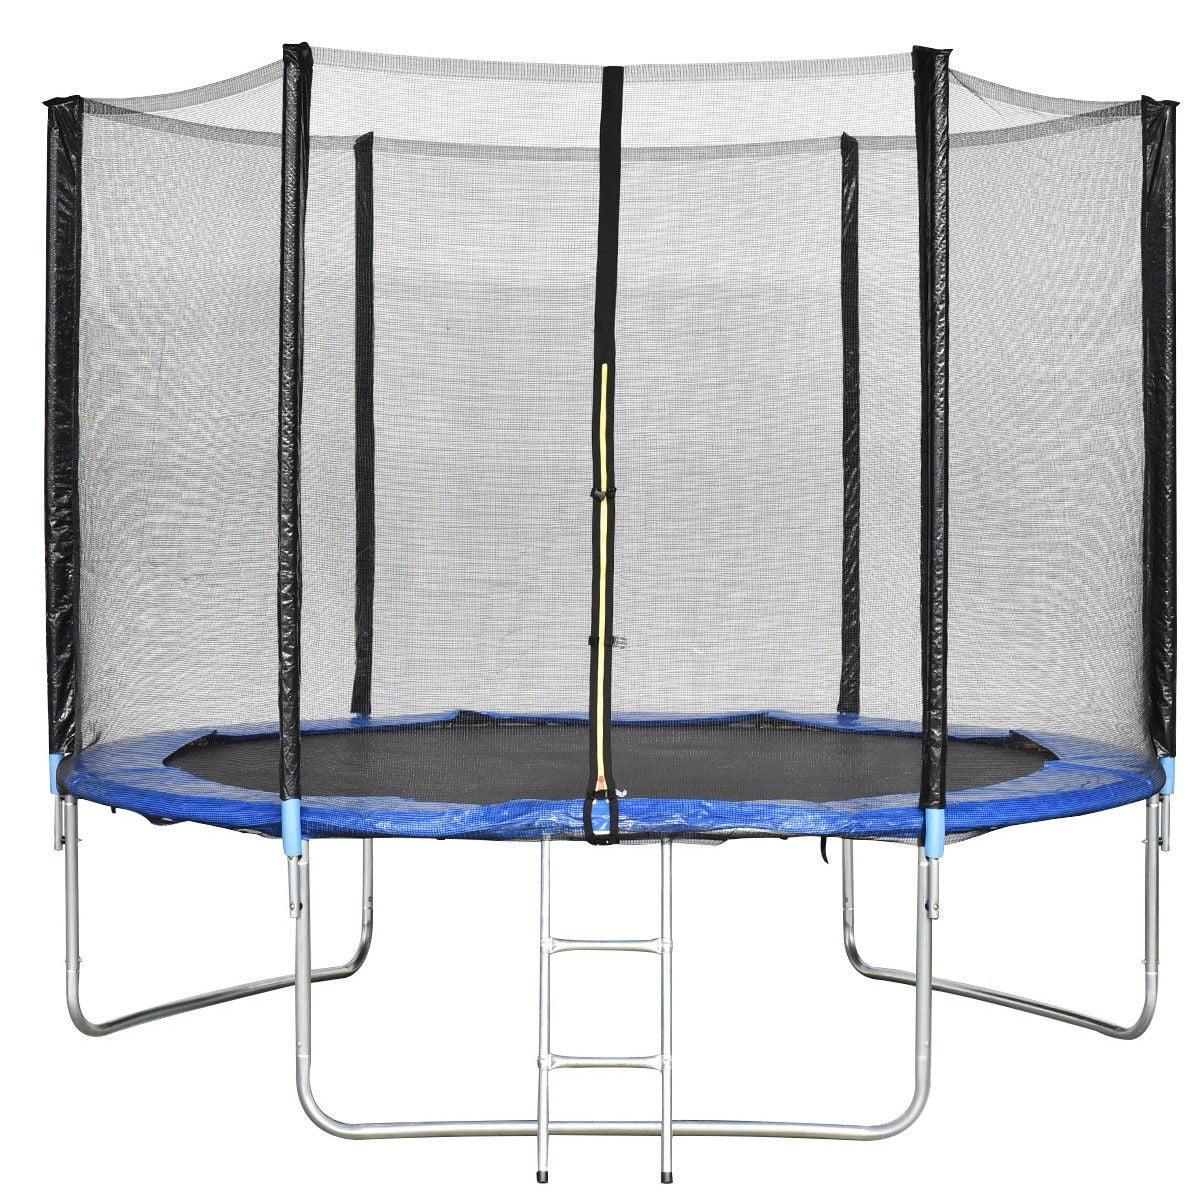 10-FT Kid Trampoline Combo Jump Safety Enclosure Net w/ Pad Ladder Xmas Gift US 